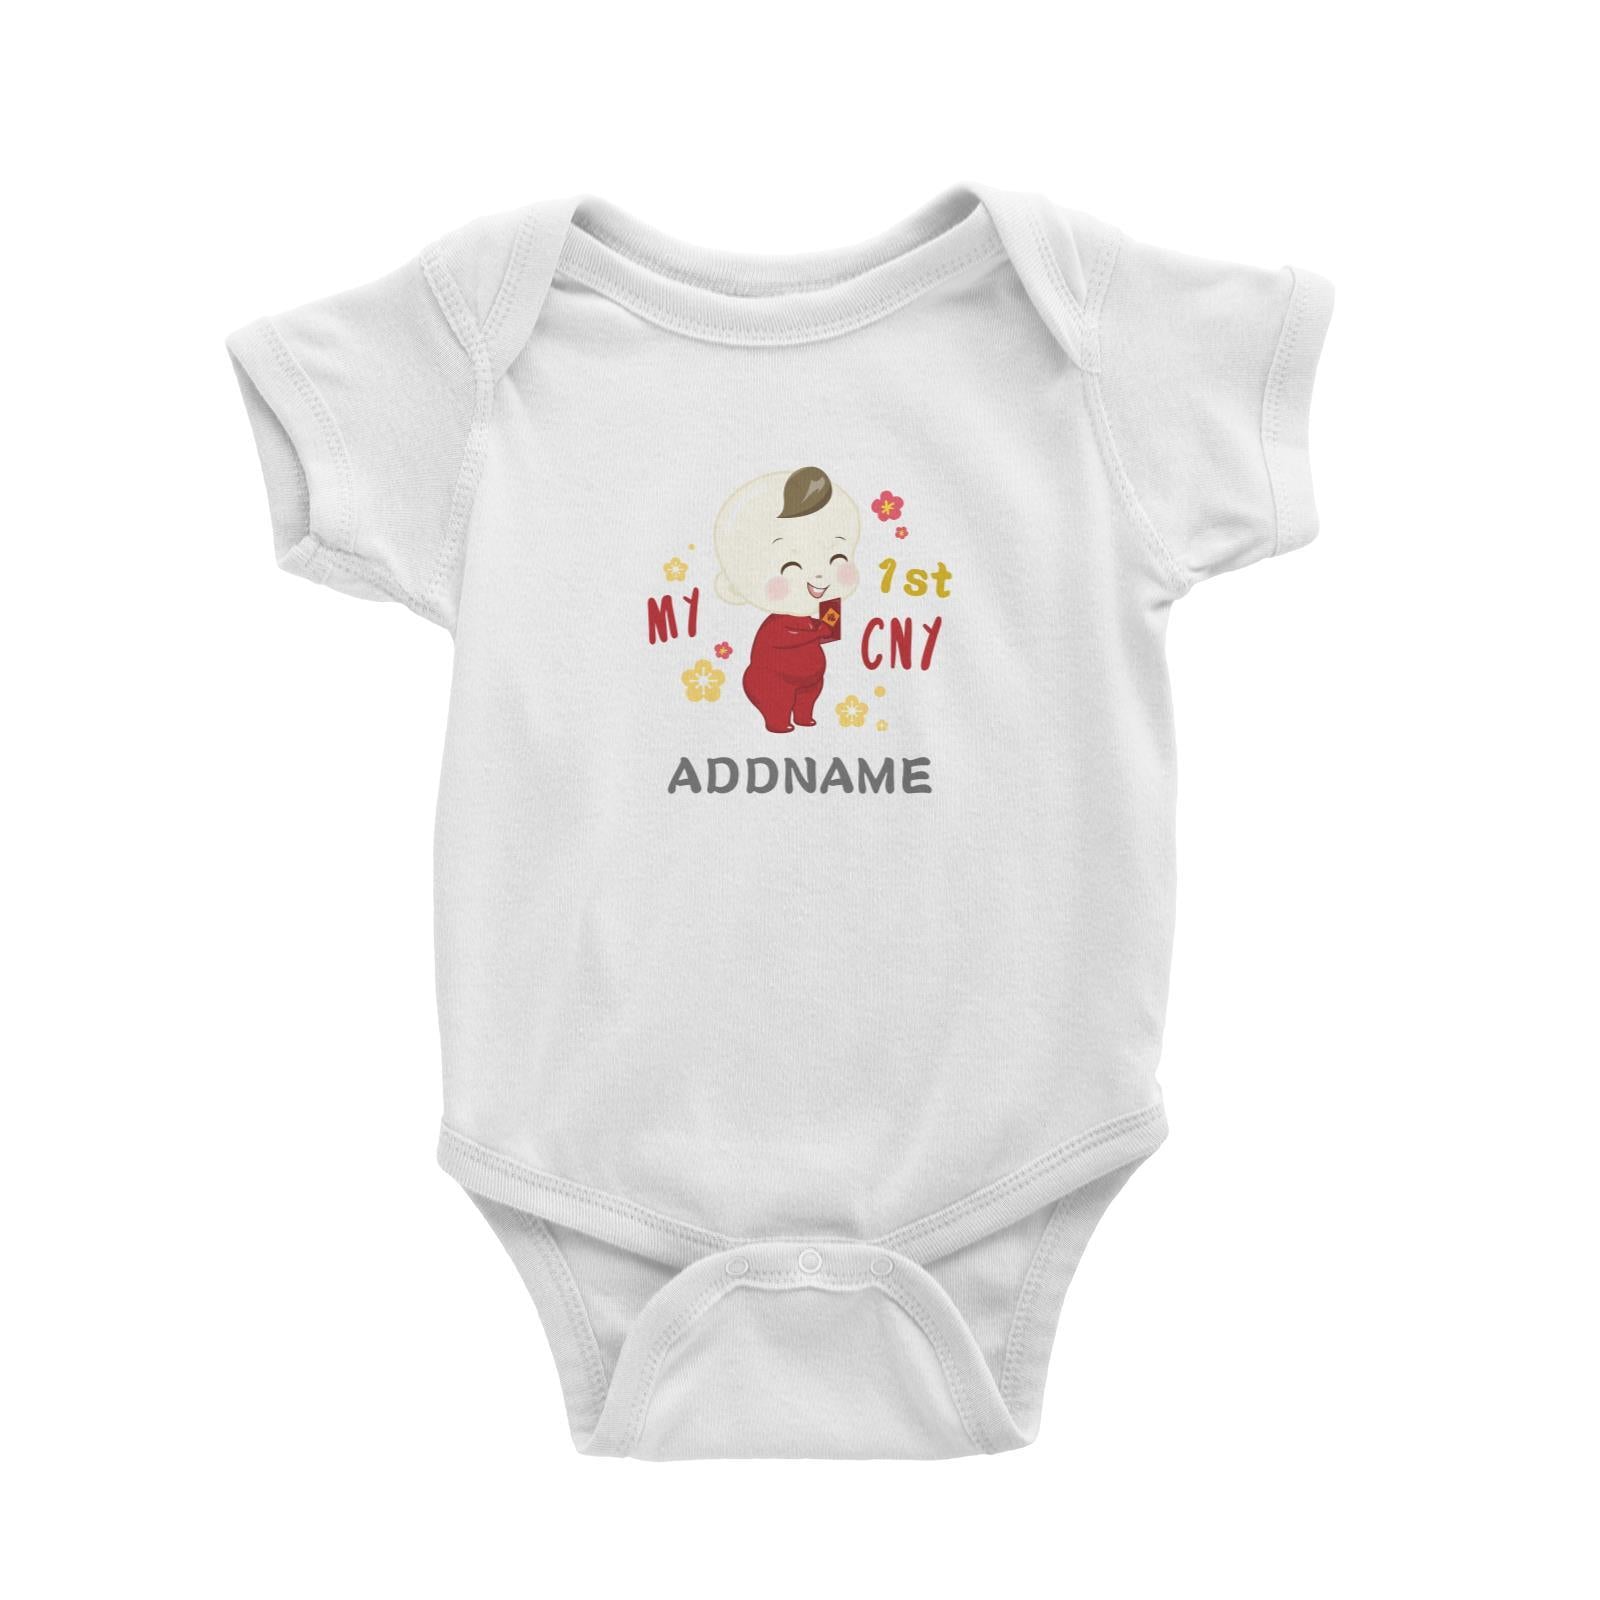 Chinese New Year Family My 1st CNY Baby Boy Addname Baby Romper